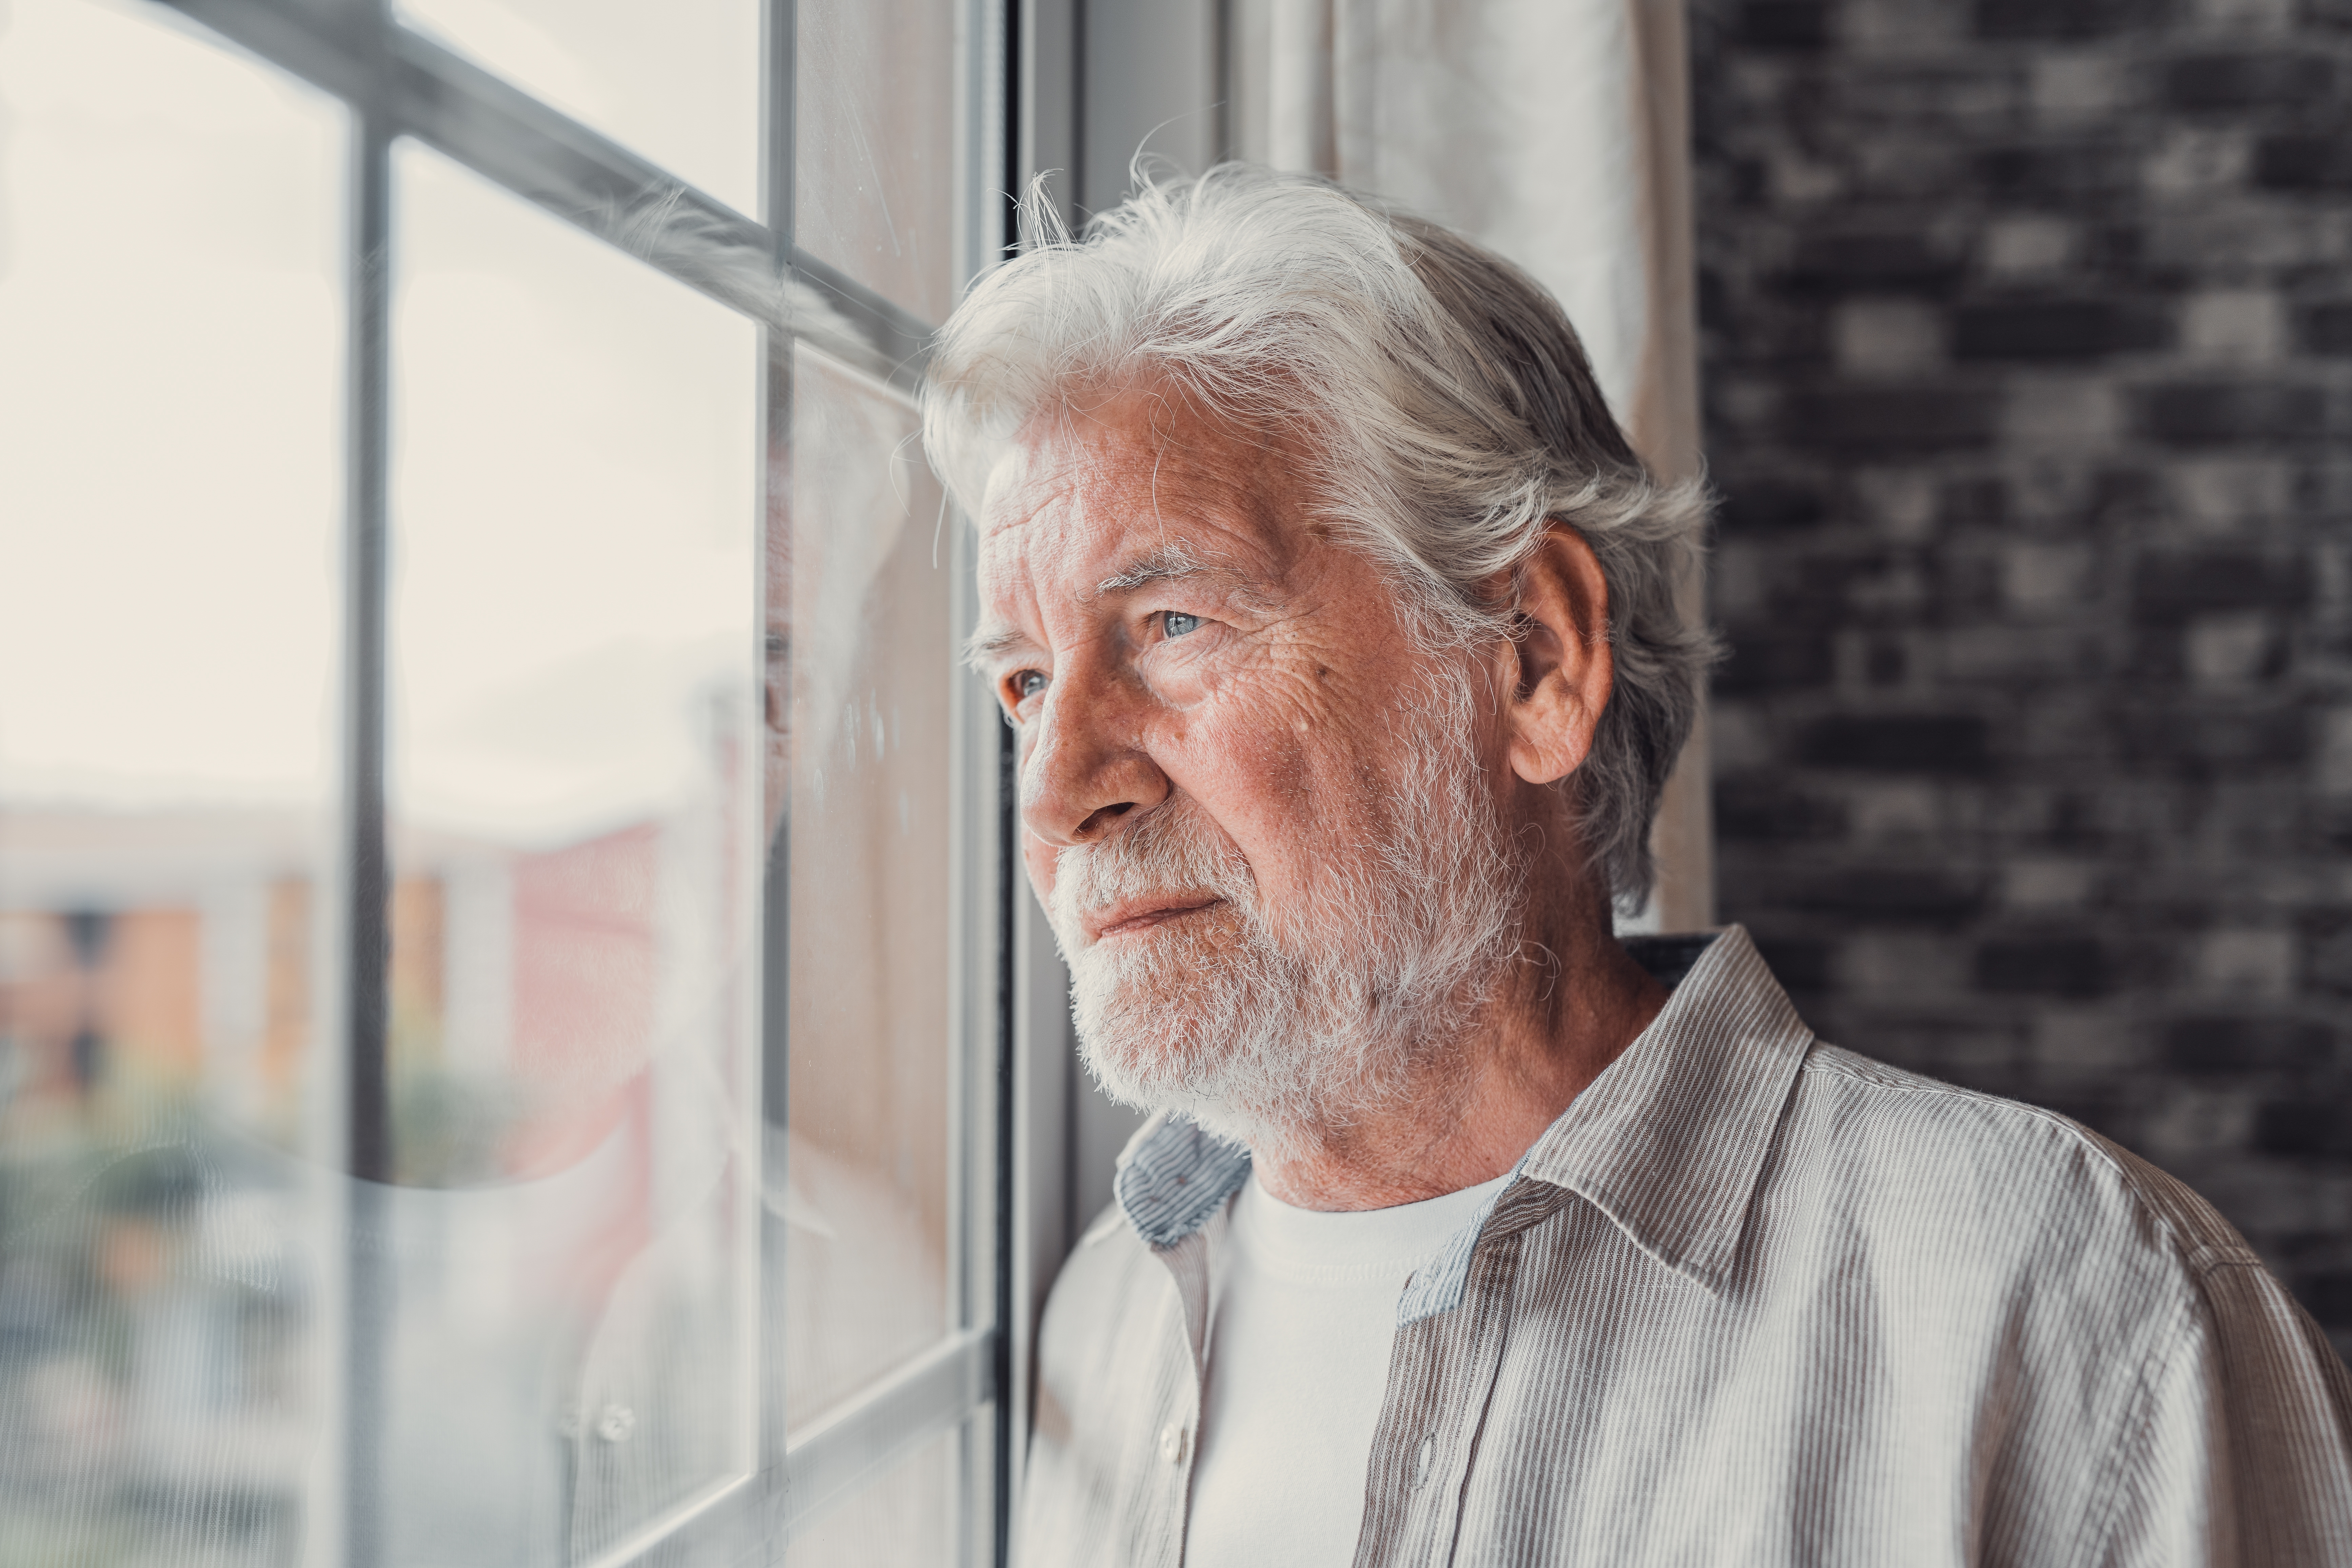 A pensive senior man looking out of the window | Source: Shutterstock